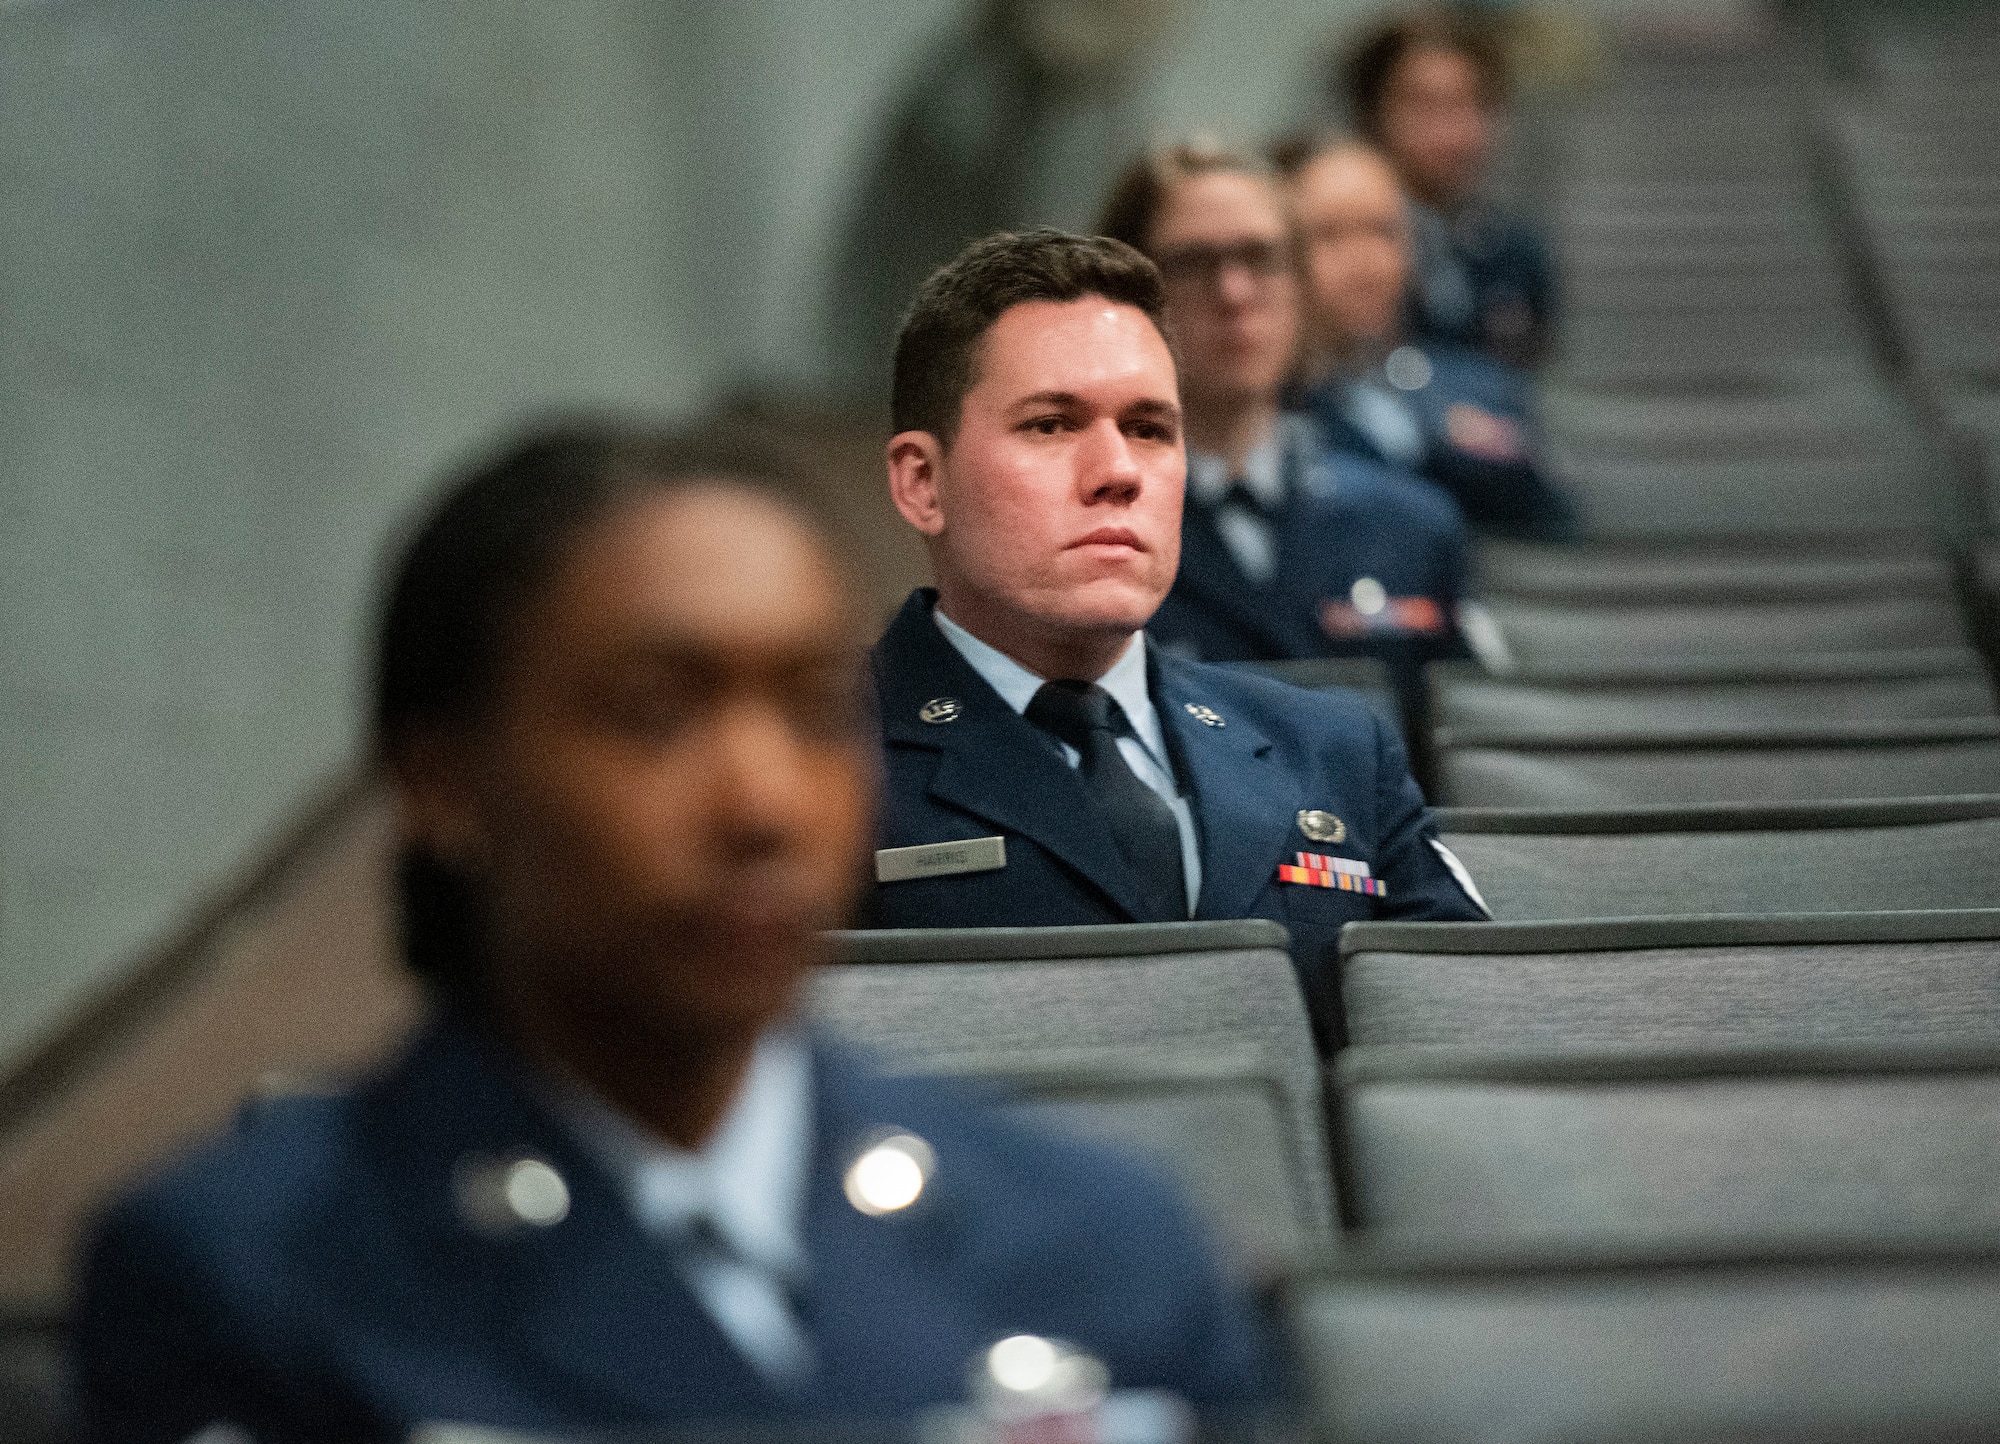 Staff Sgt. Nicholas Harris-Duke, National Air and Space Intelligence Center, listens with other graduates to the commencement address during the Community College of the Air Force spring graduation ceremony May 26, 2021, in the theater at Wright-Patterson Air Force Base, Ohio. Harris-Duke earned an associate’s degree in intelligence studies and technology. (U.S. Air Force photo by R.J. Oriez)